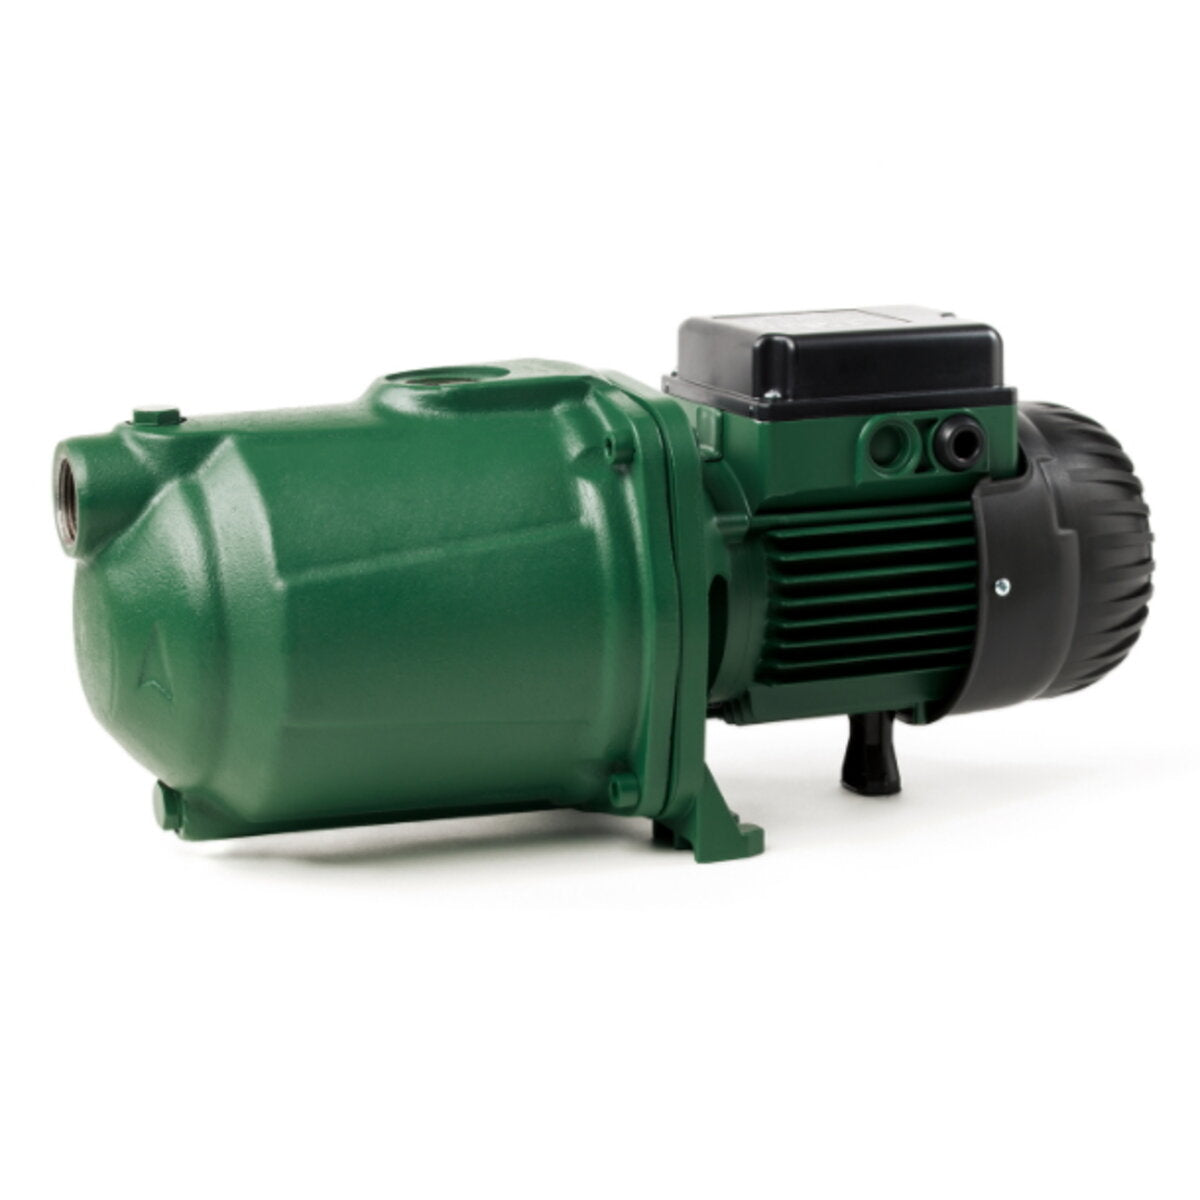 EURO 30/50 M single-phase centrifugal multistage DAB surface pump 0.75 HP / 0.55 kW